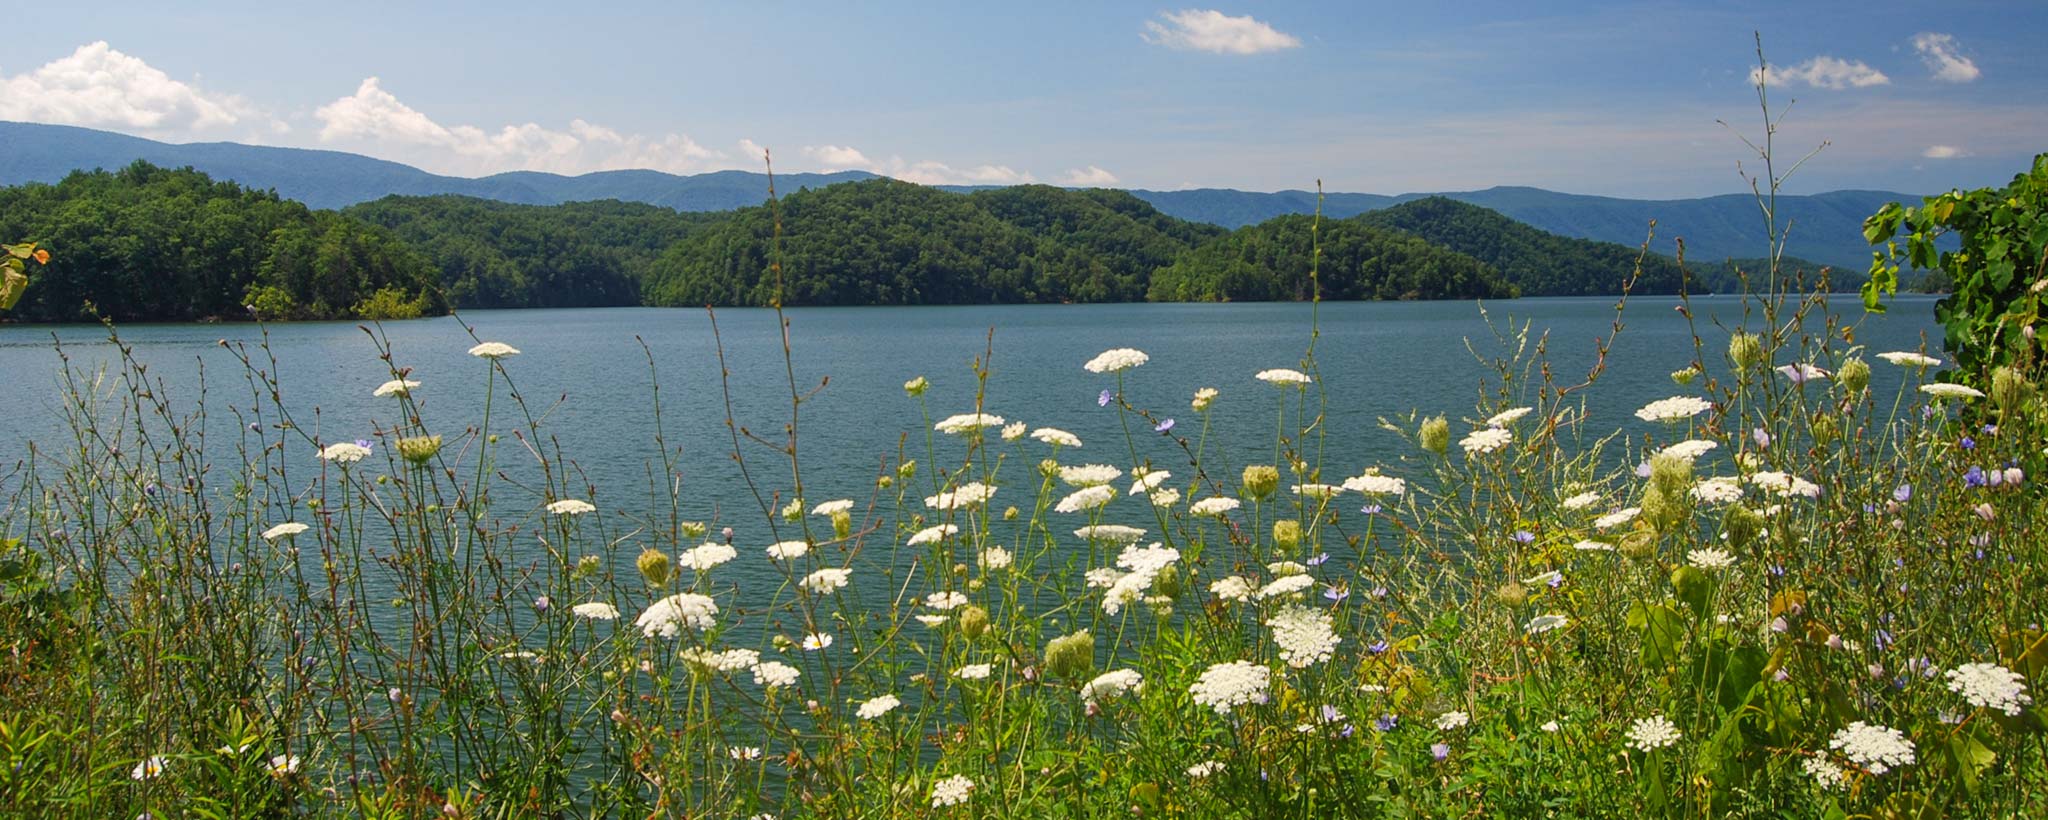 South Holston lake with wildflowers